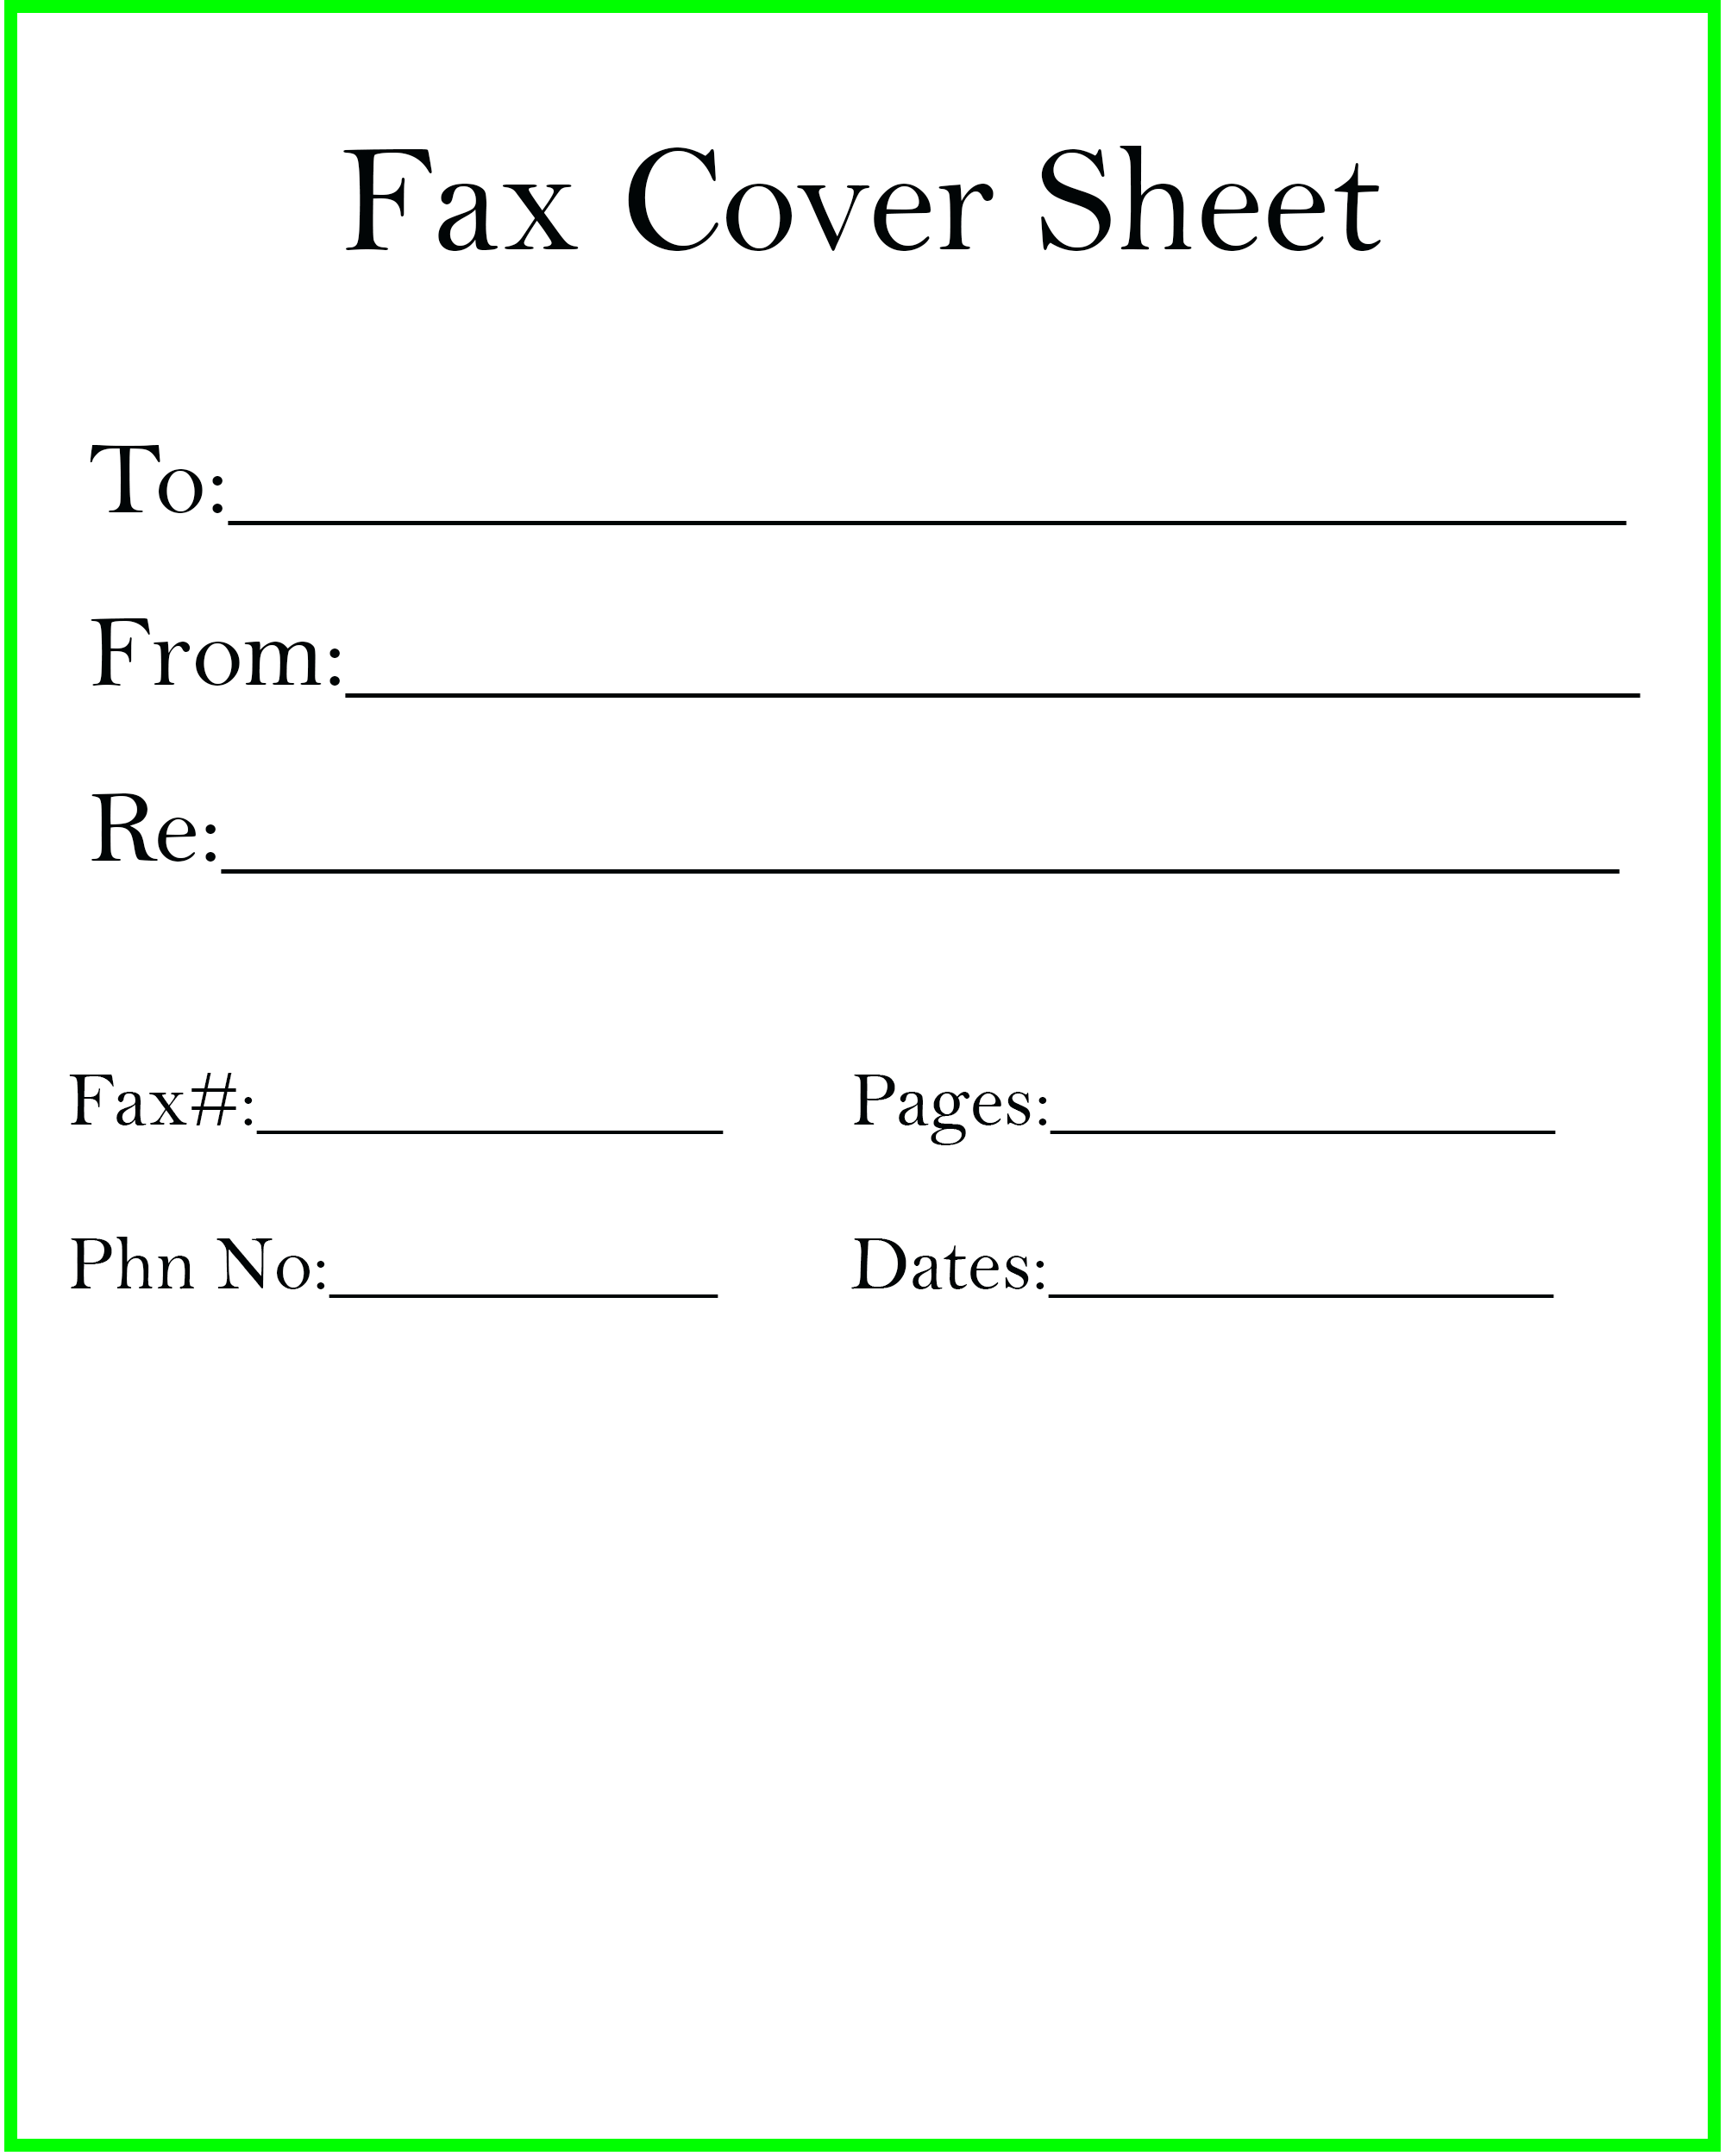 Fax Cover Sheet Free Blank Printable Template in PDF